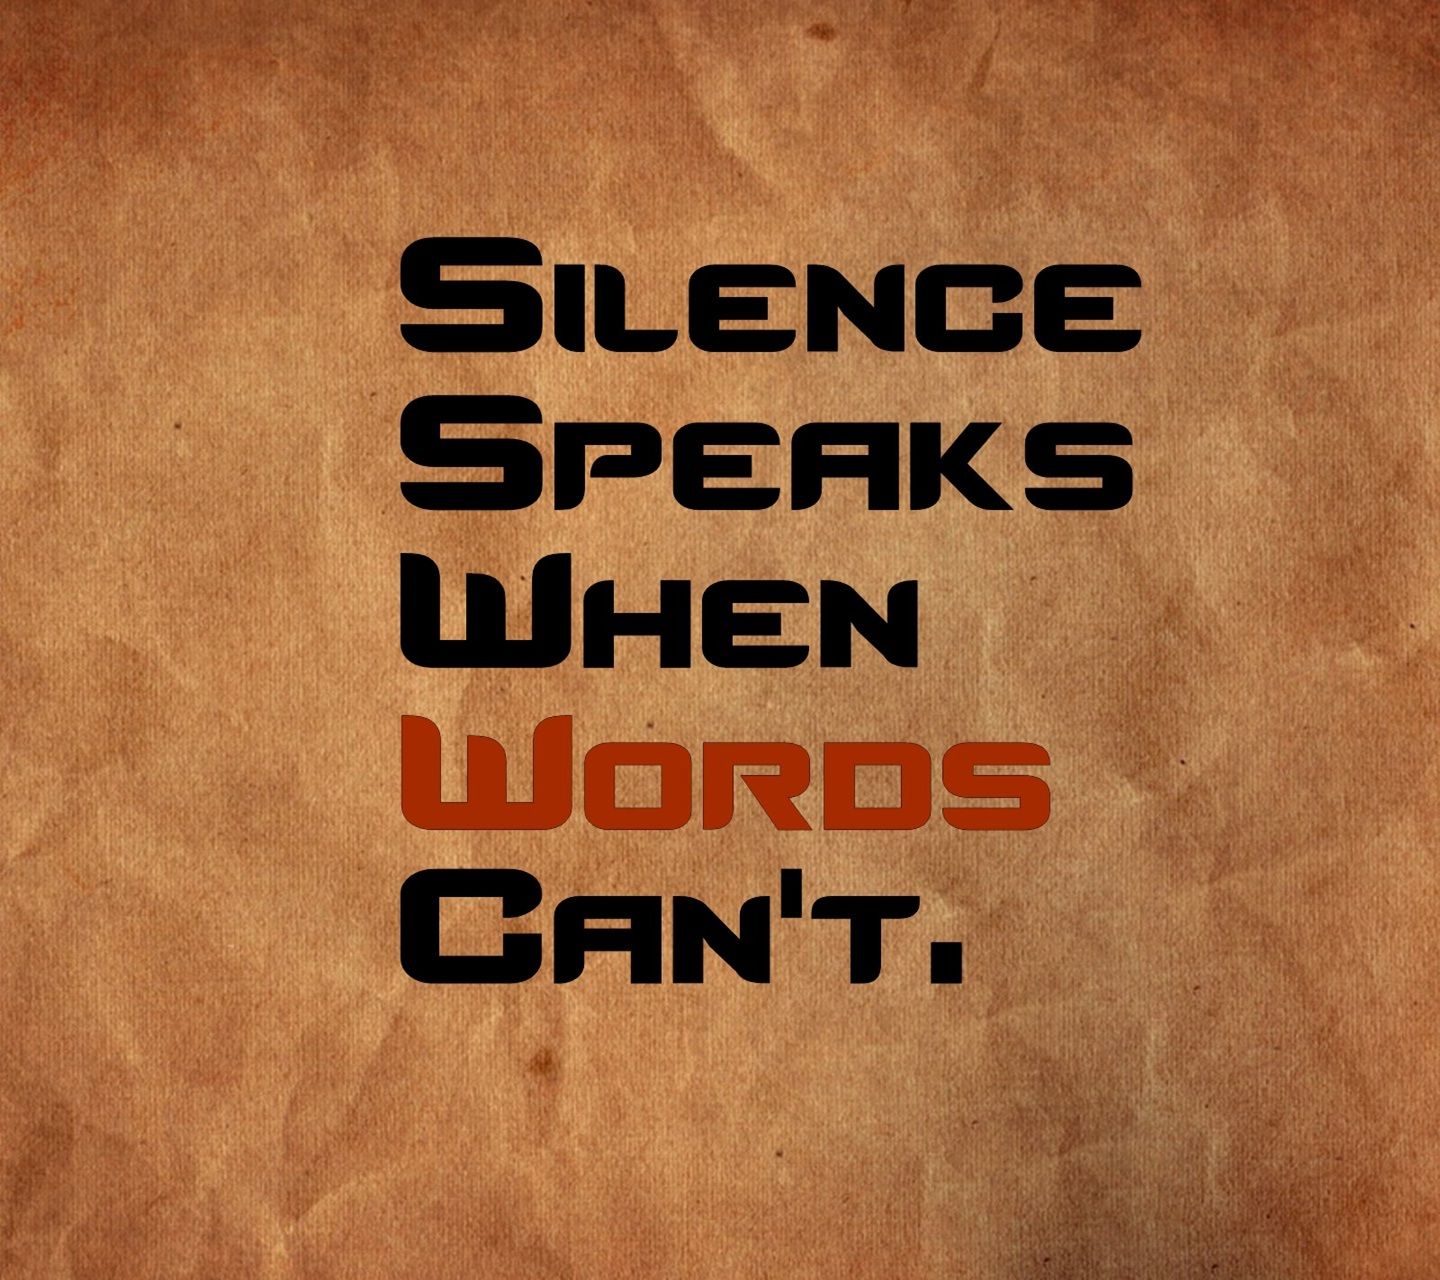 silence quotes with picture. Awesome Quotes: Silence speaks when words can't. Inspirational quotes, Words, Silence quotes